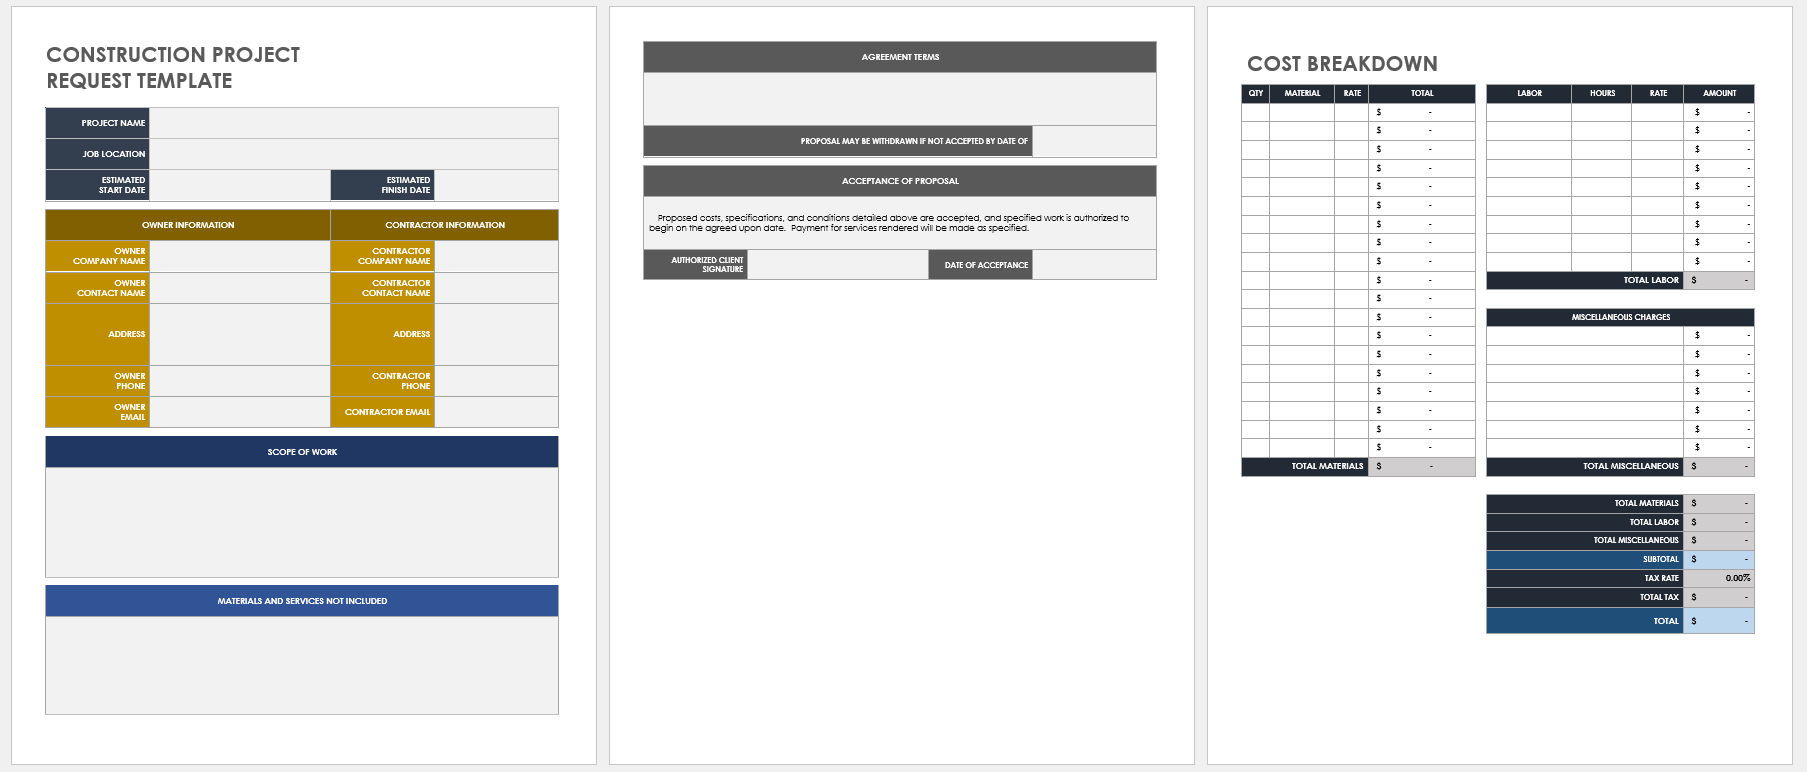 Construction Project Request Template